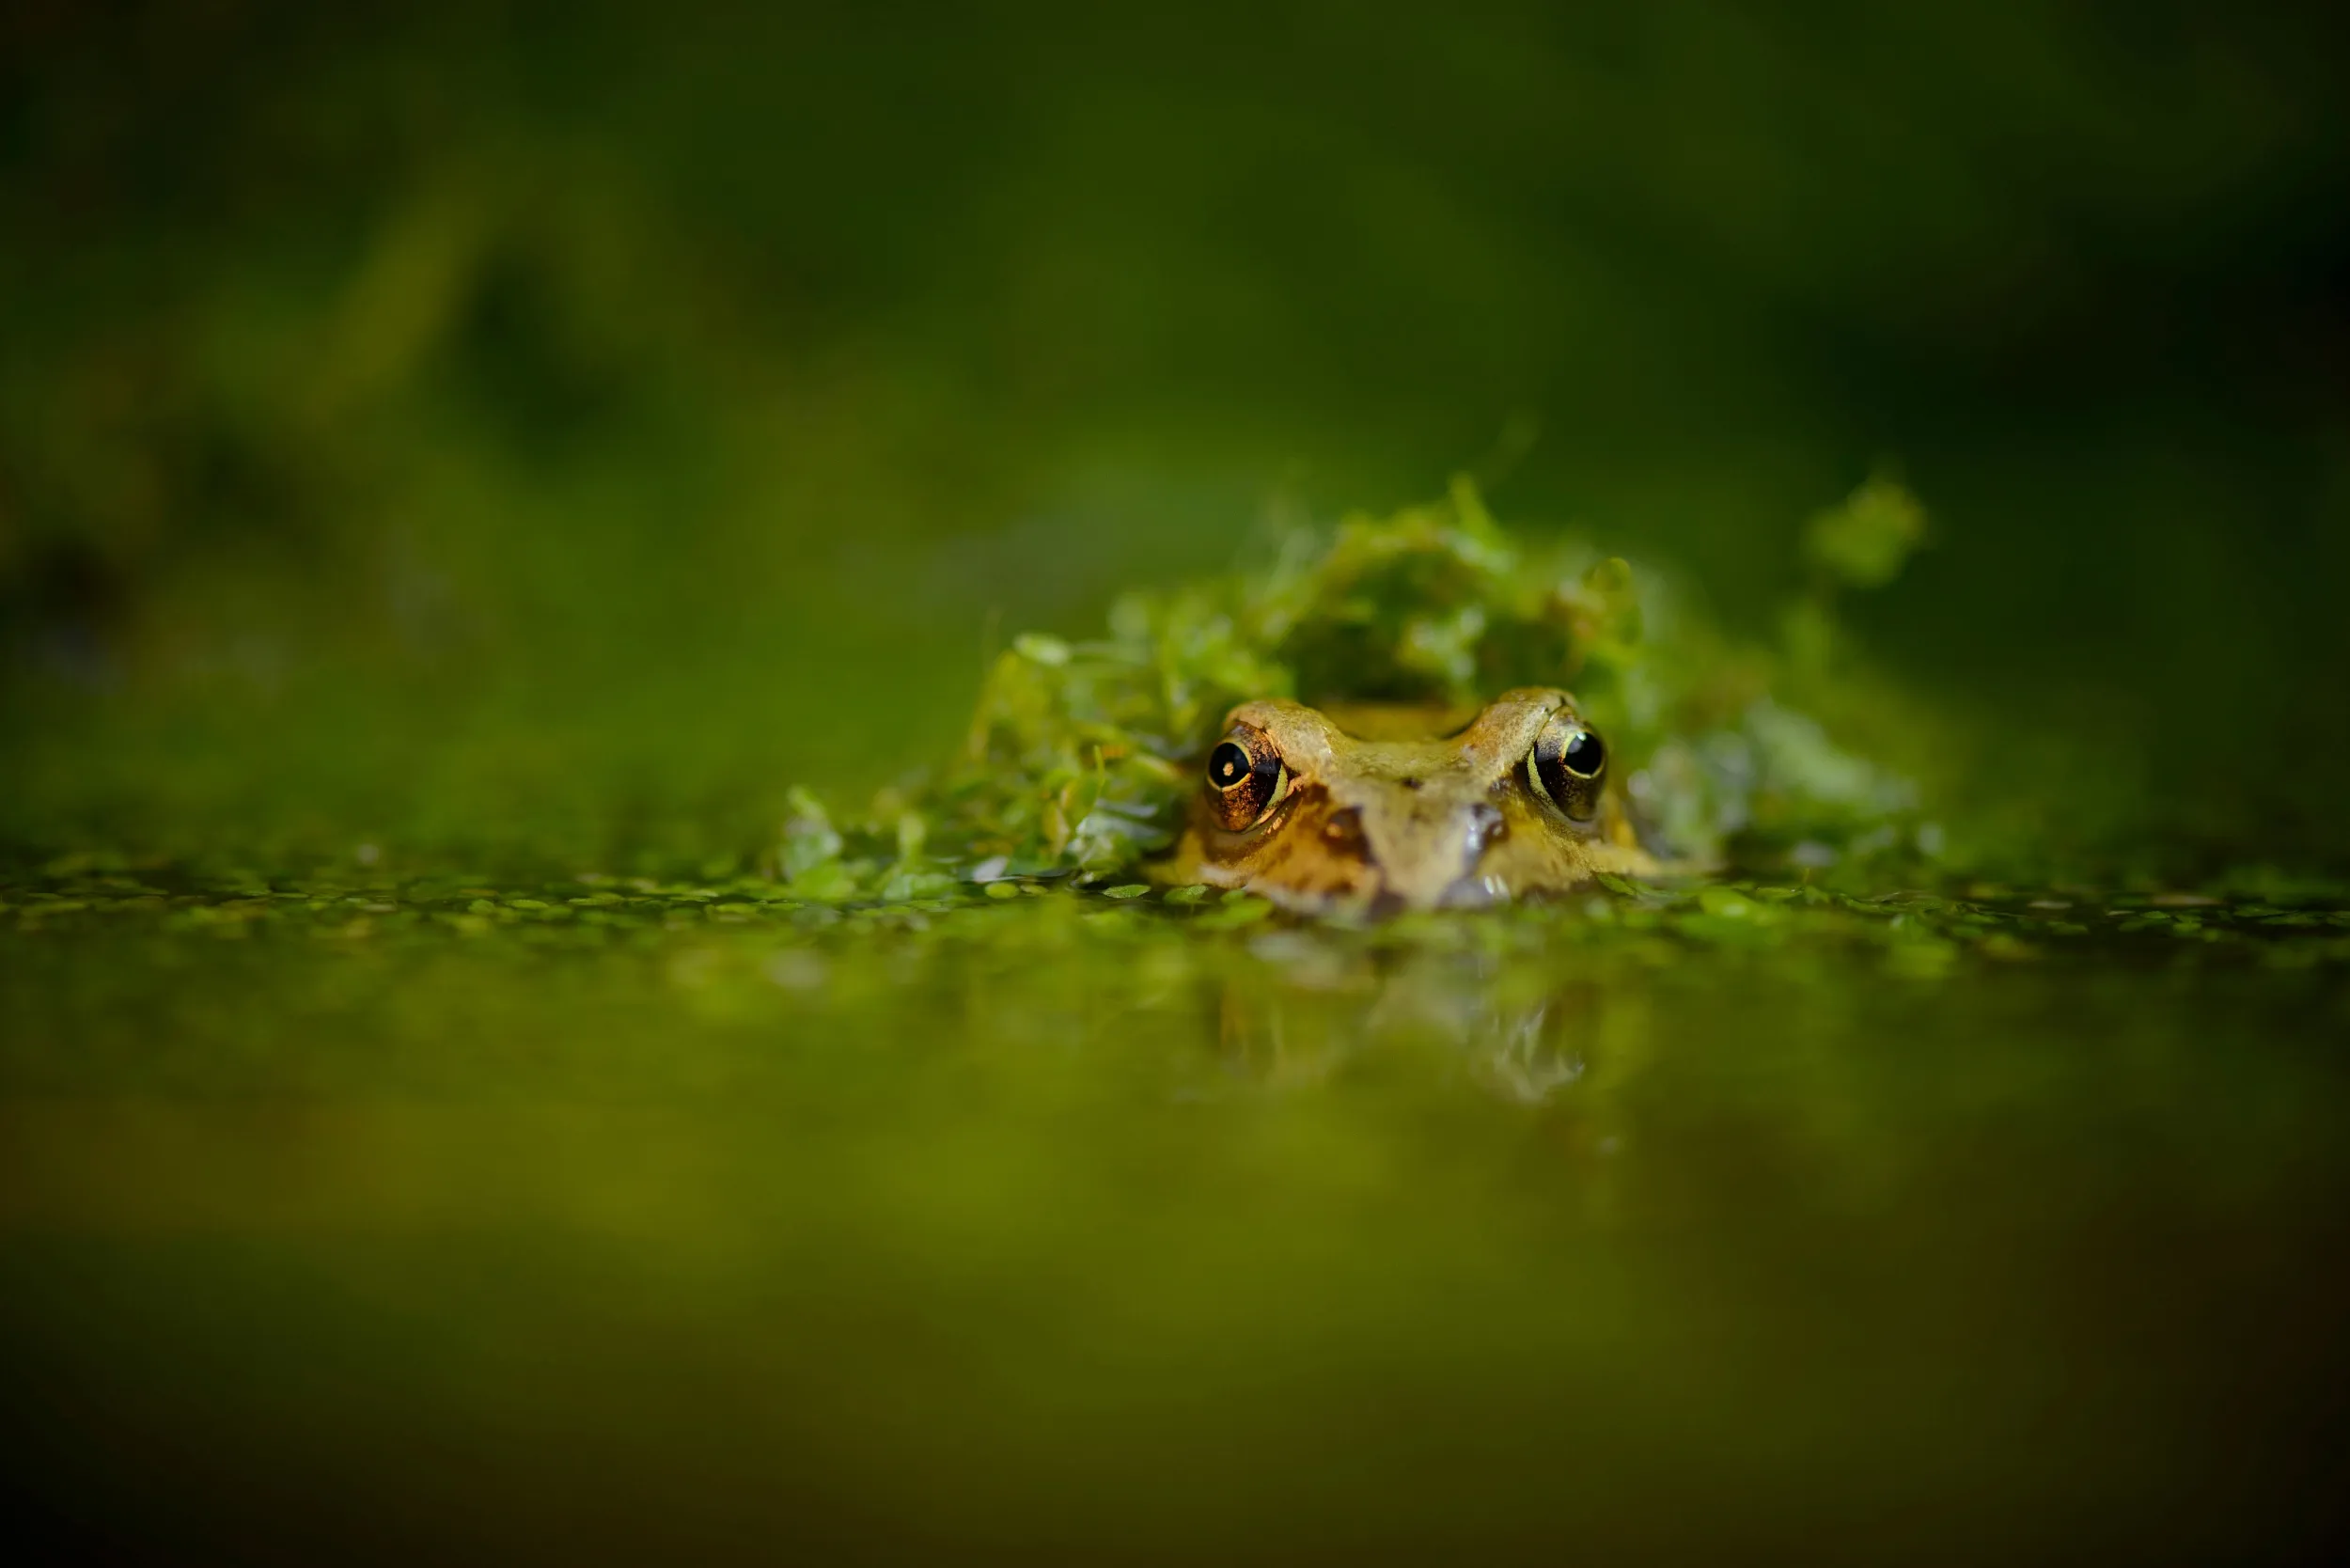 A Common Frog poking its duckweed covered head out of the surface of a pond.